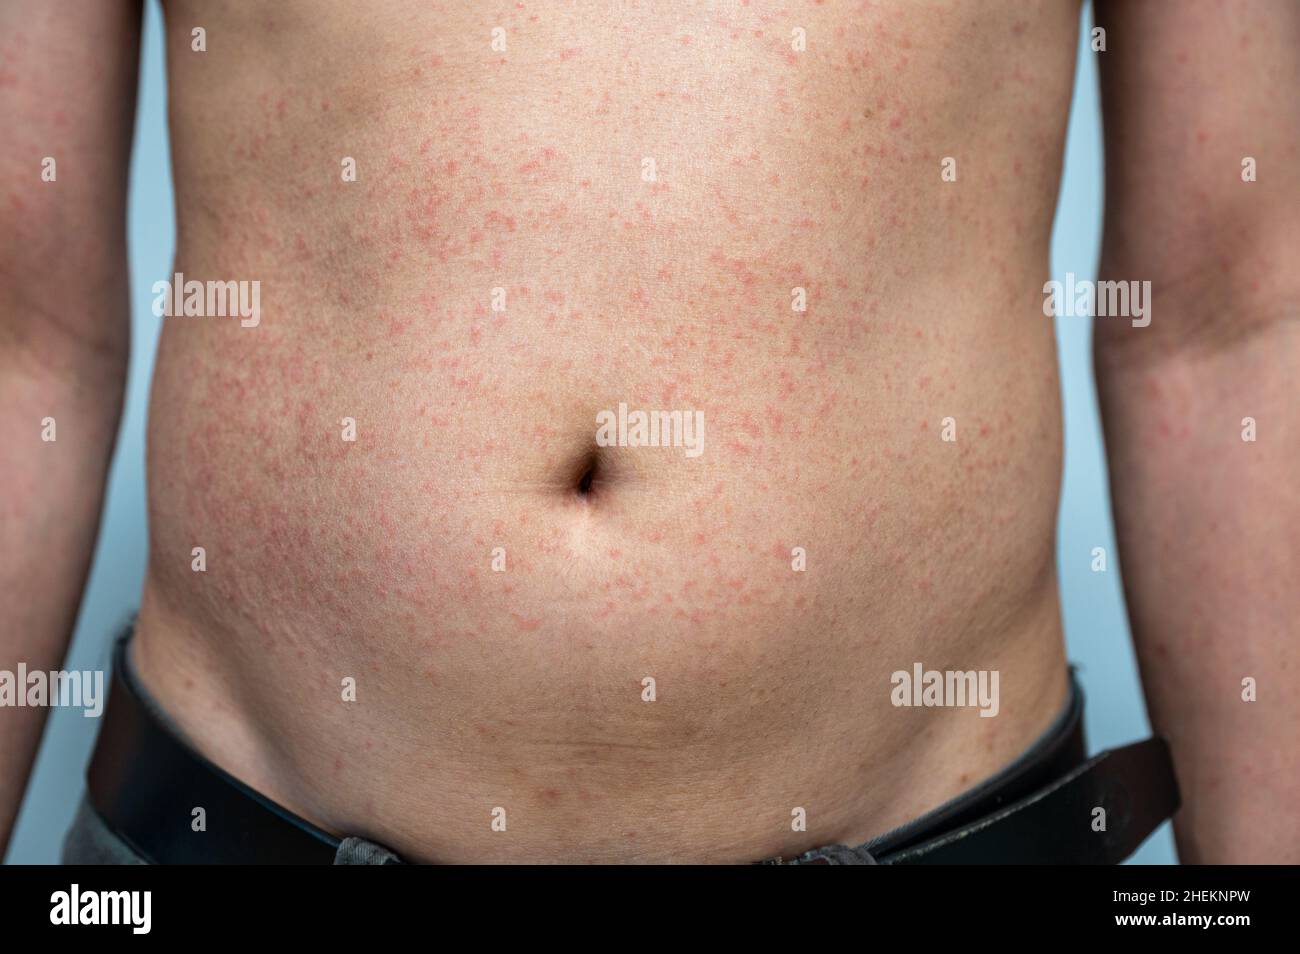 Dermatitis rash viral disease with immunodeficiency on body of young adult  asian, scratch with itch, Measles Virus, Viral Exanthem Stock Photo - Alamy